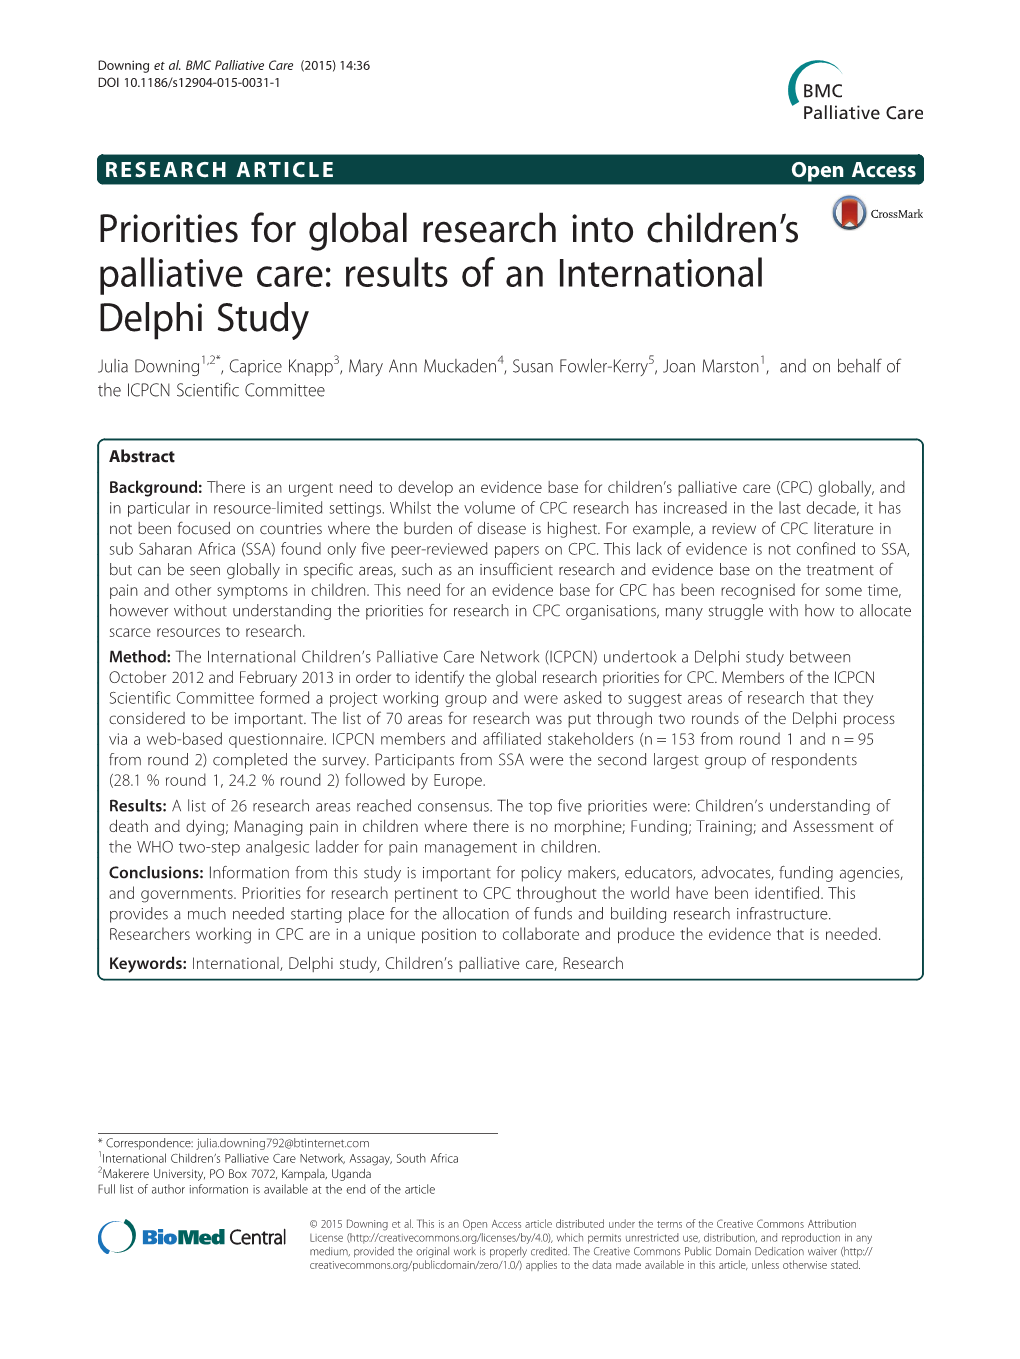 Priorities for Global Research Into Children's Palliative Care: Results Of